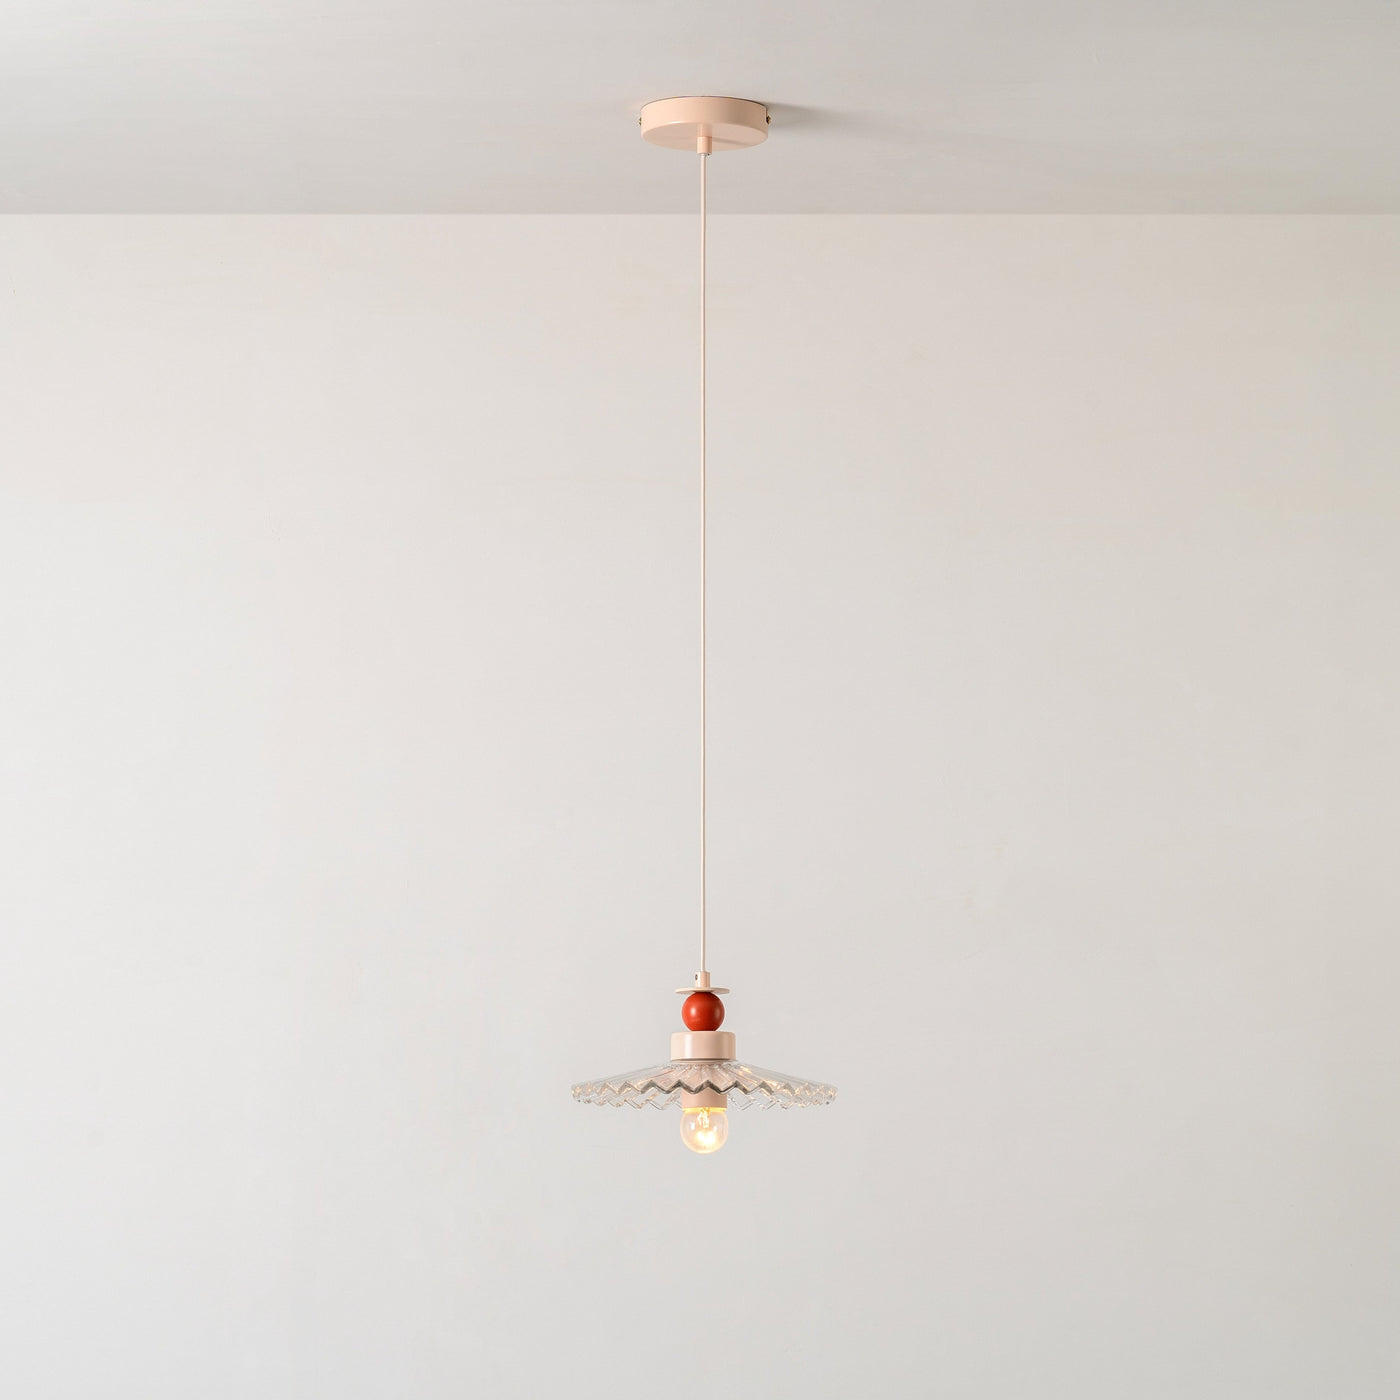 Houseof Ribbed Pendant Ceiling Light designed by Emma Gurner, light on. Available from someday designs.